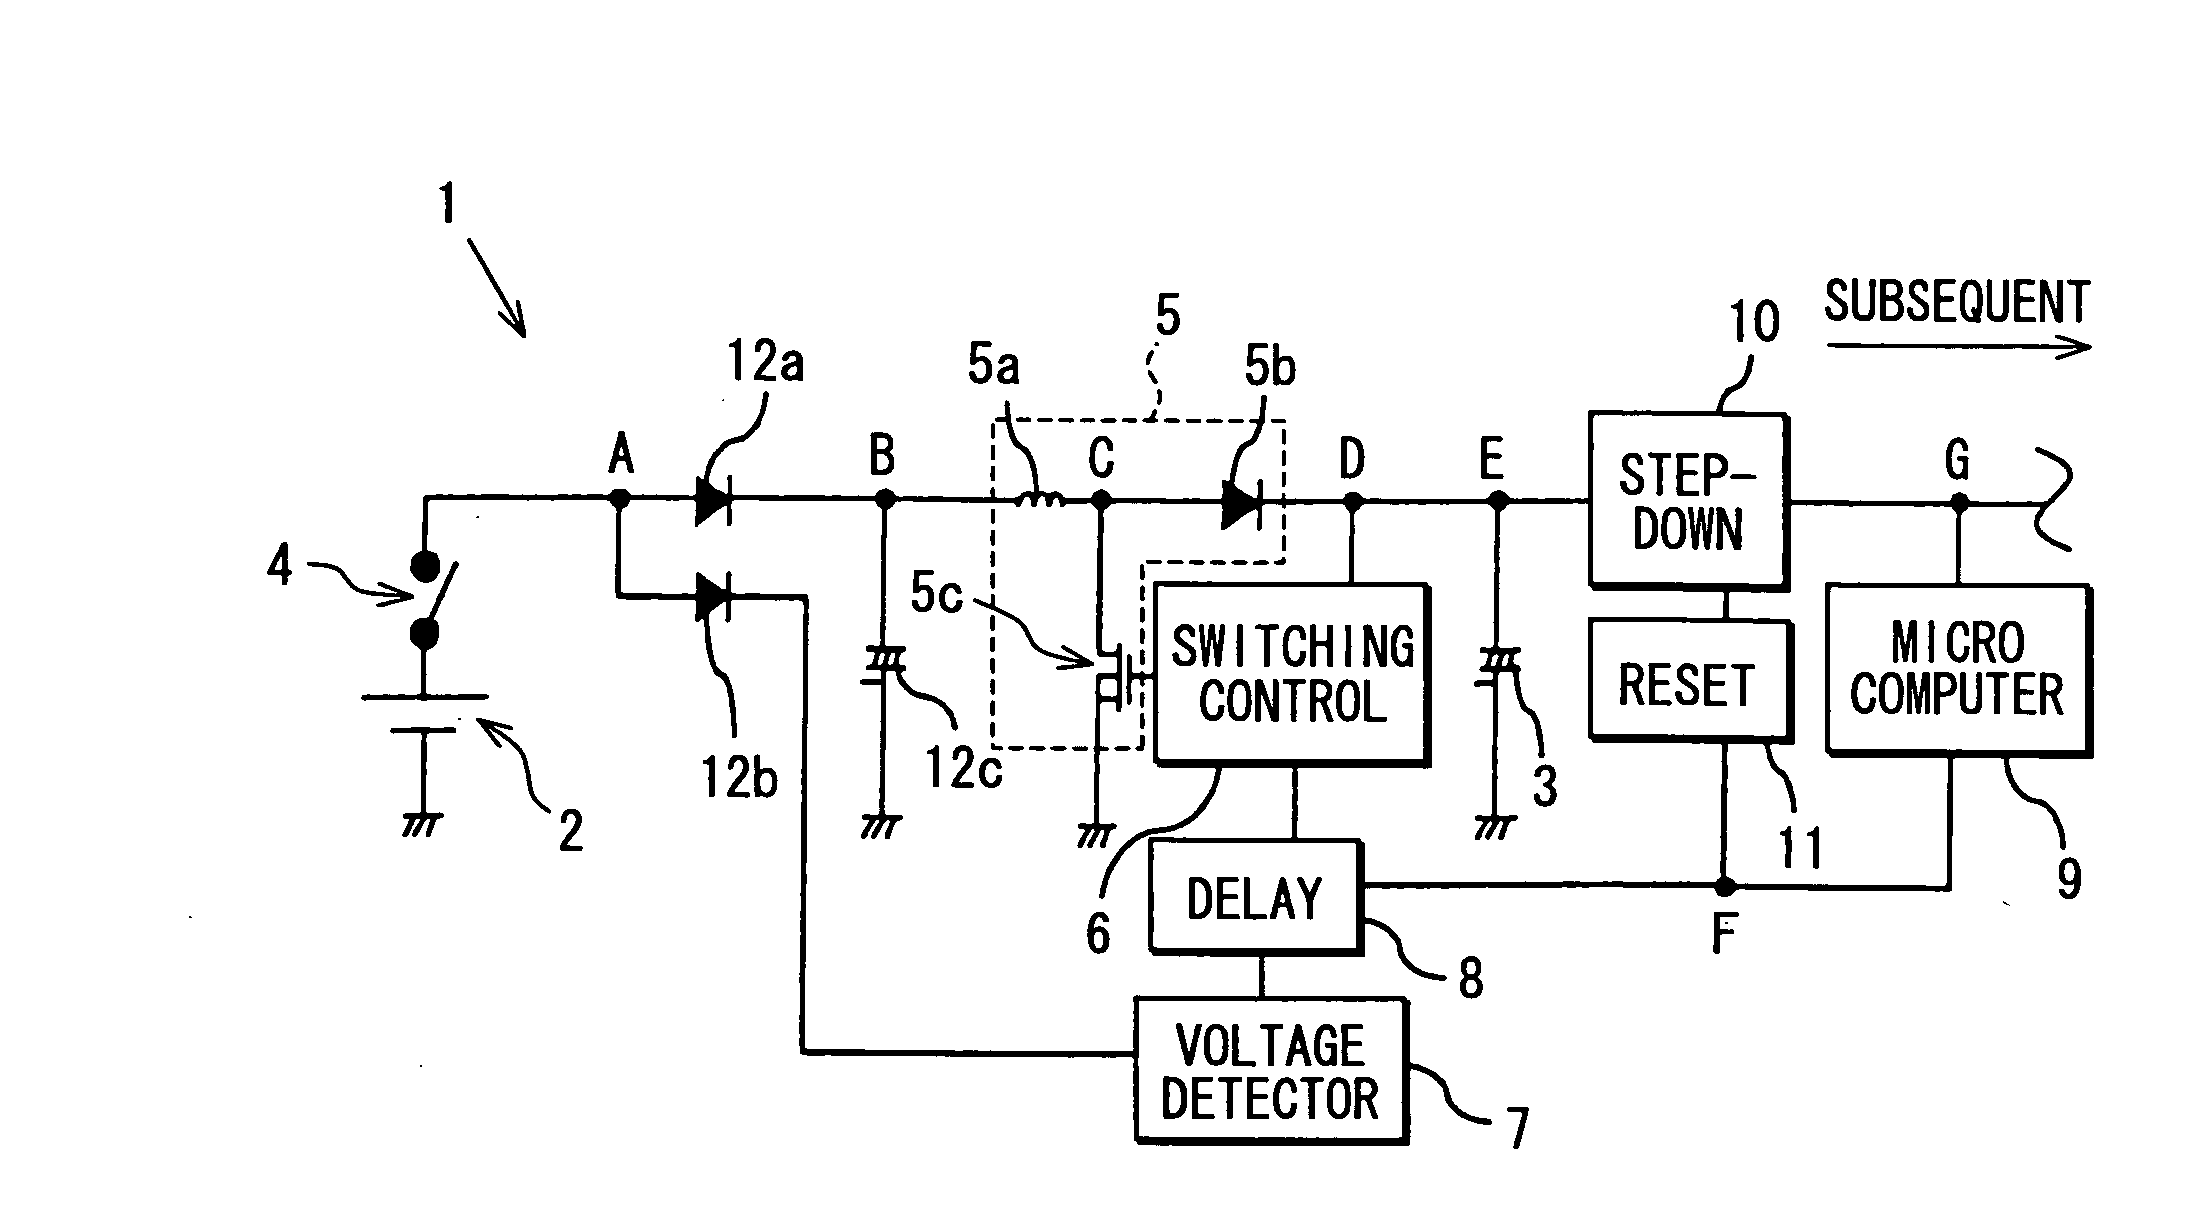 Switching booster power circuit